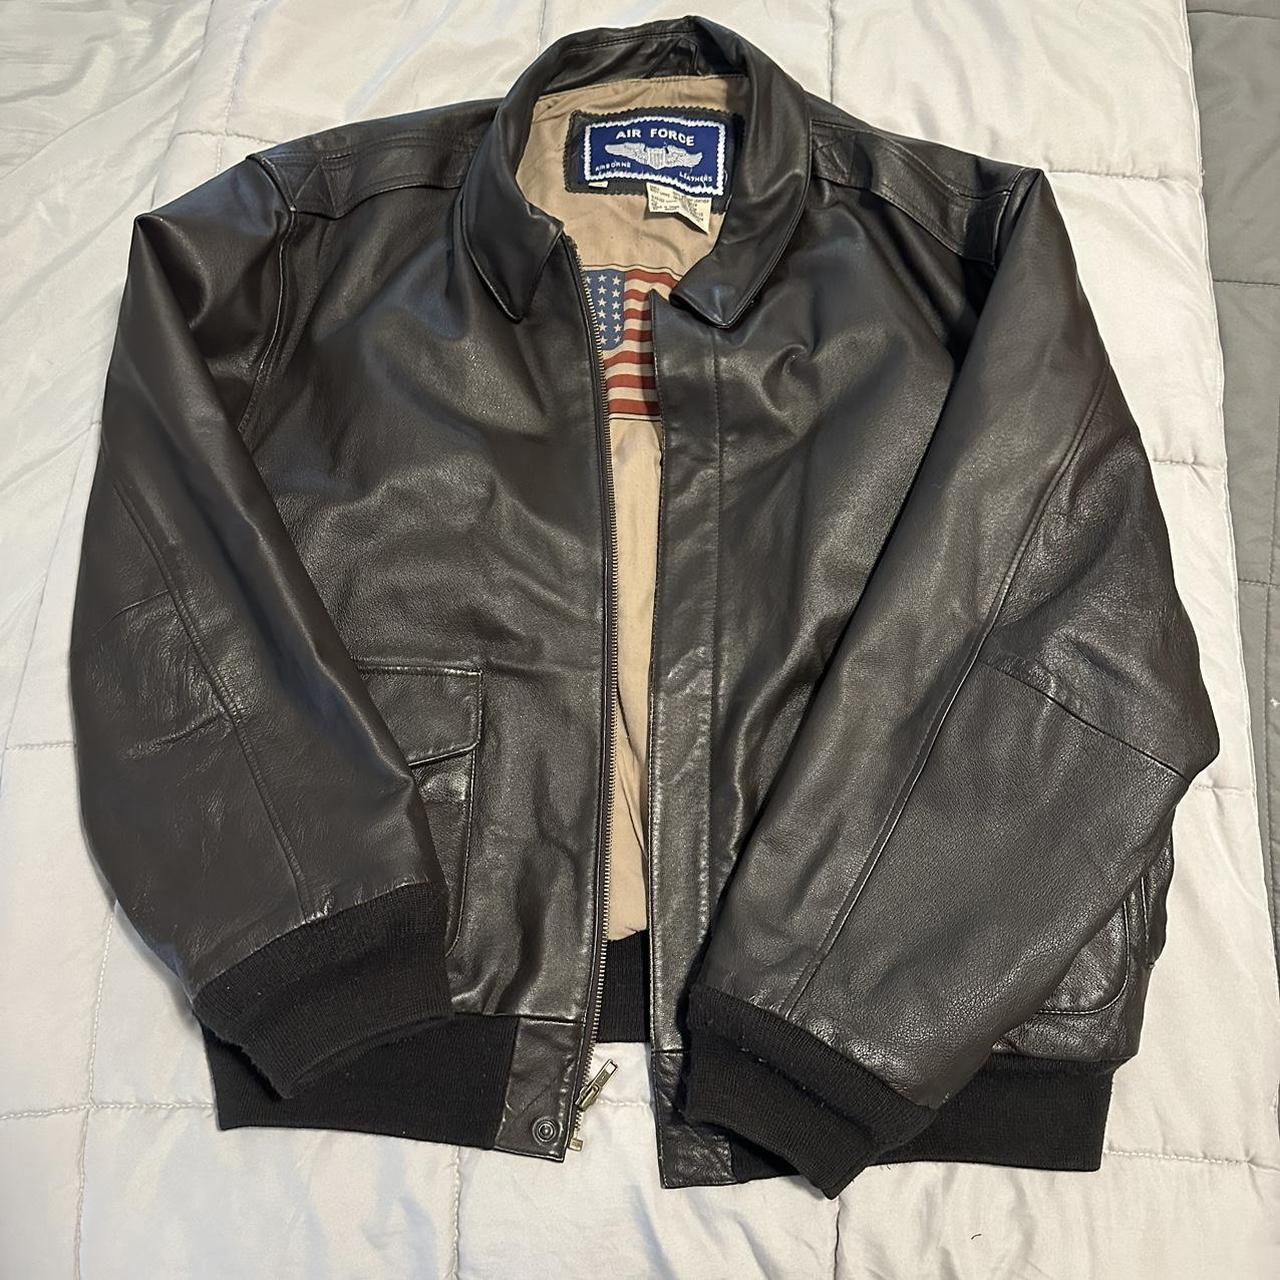 AUTHENTIC LANDING LEATHERS AIR FORCE JACKET REAL... - Depop